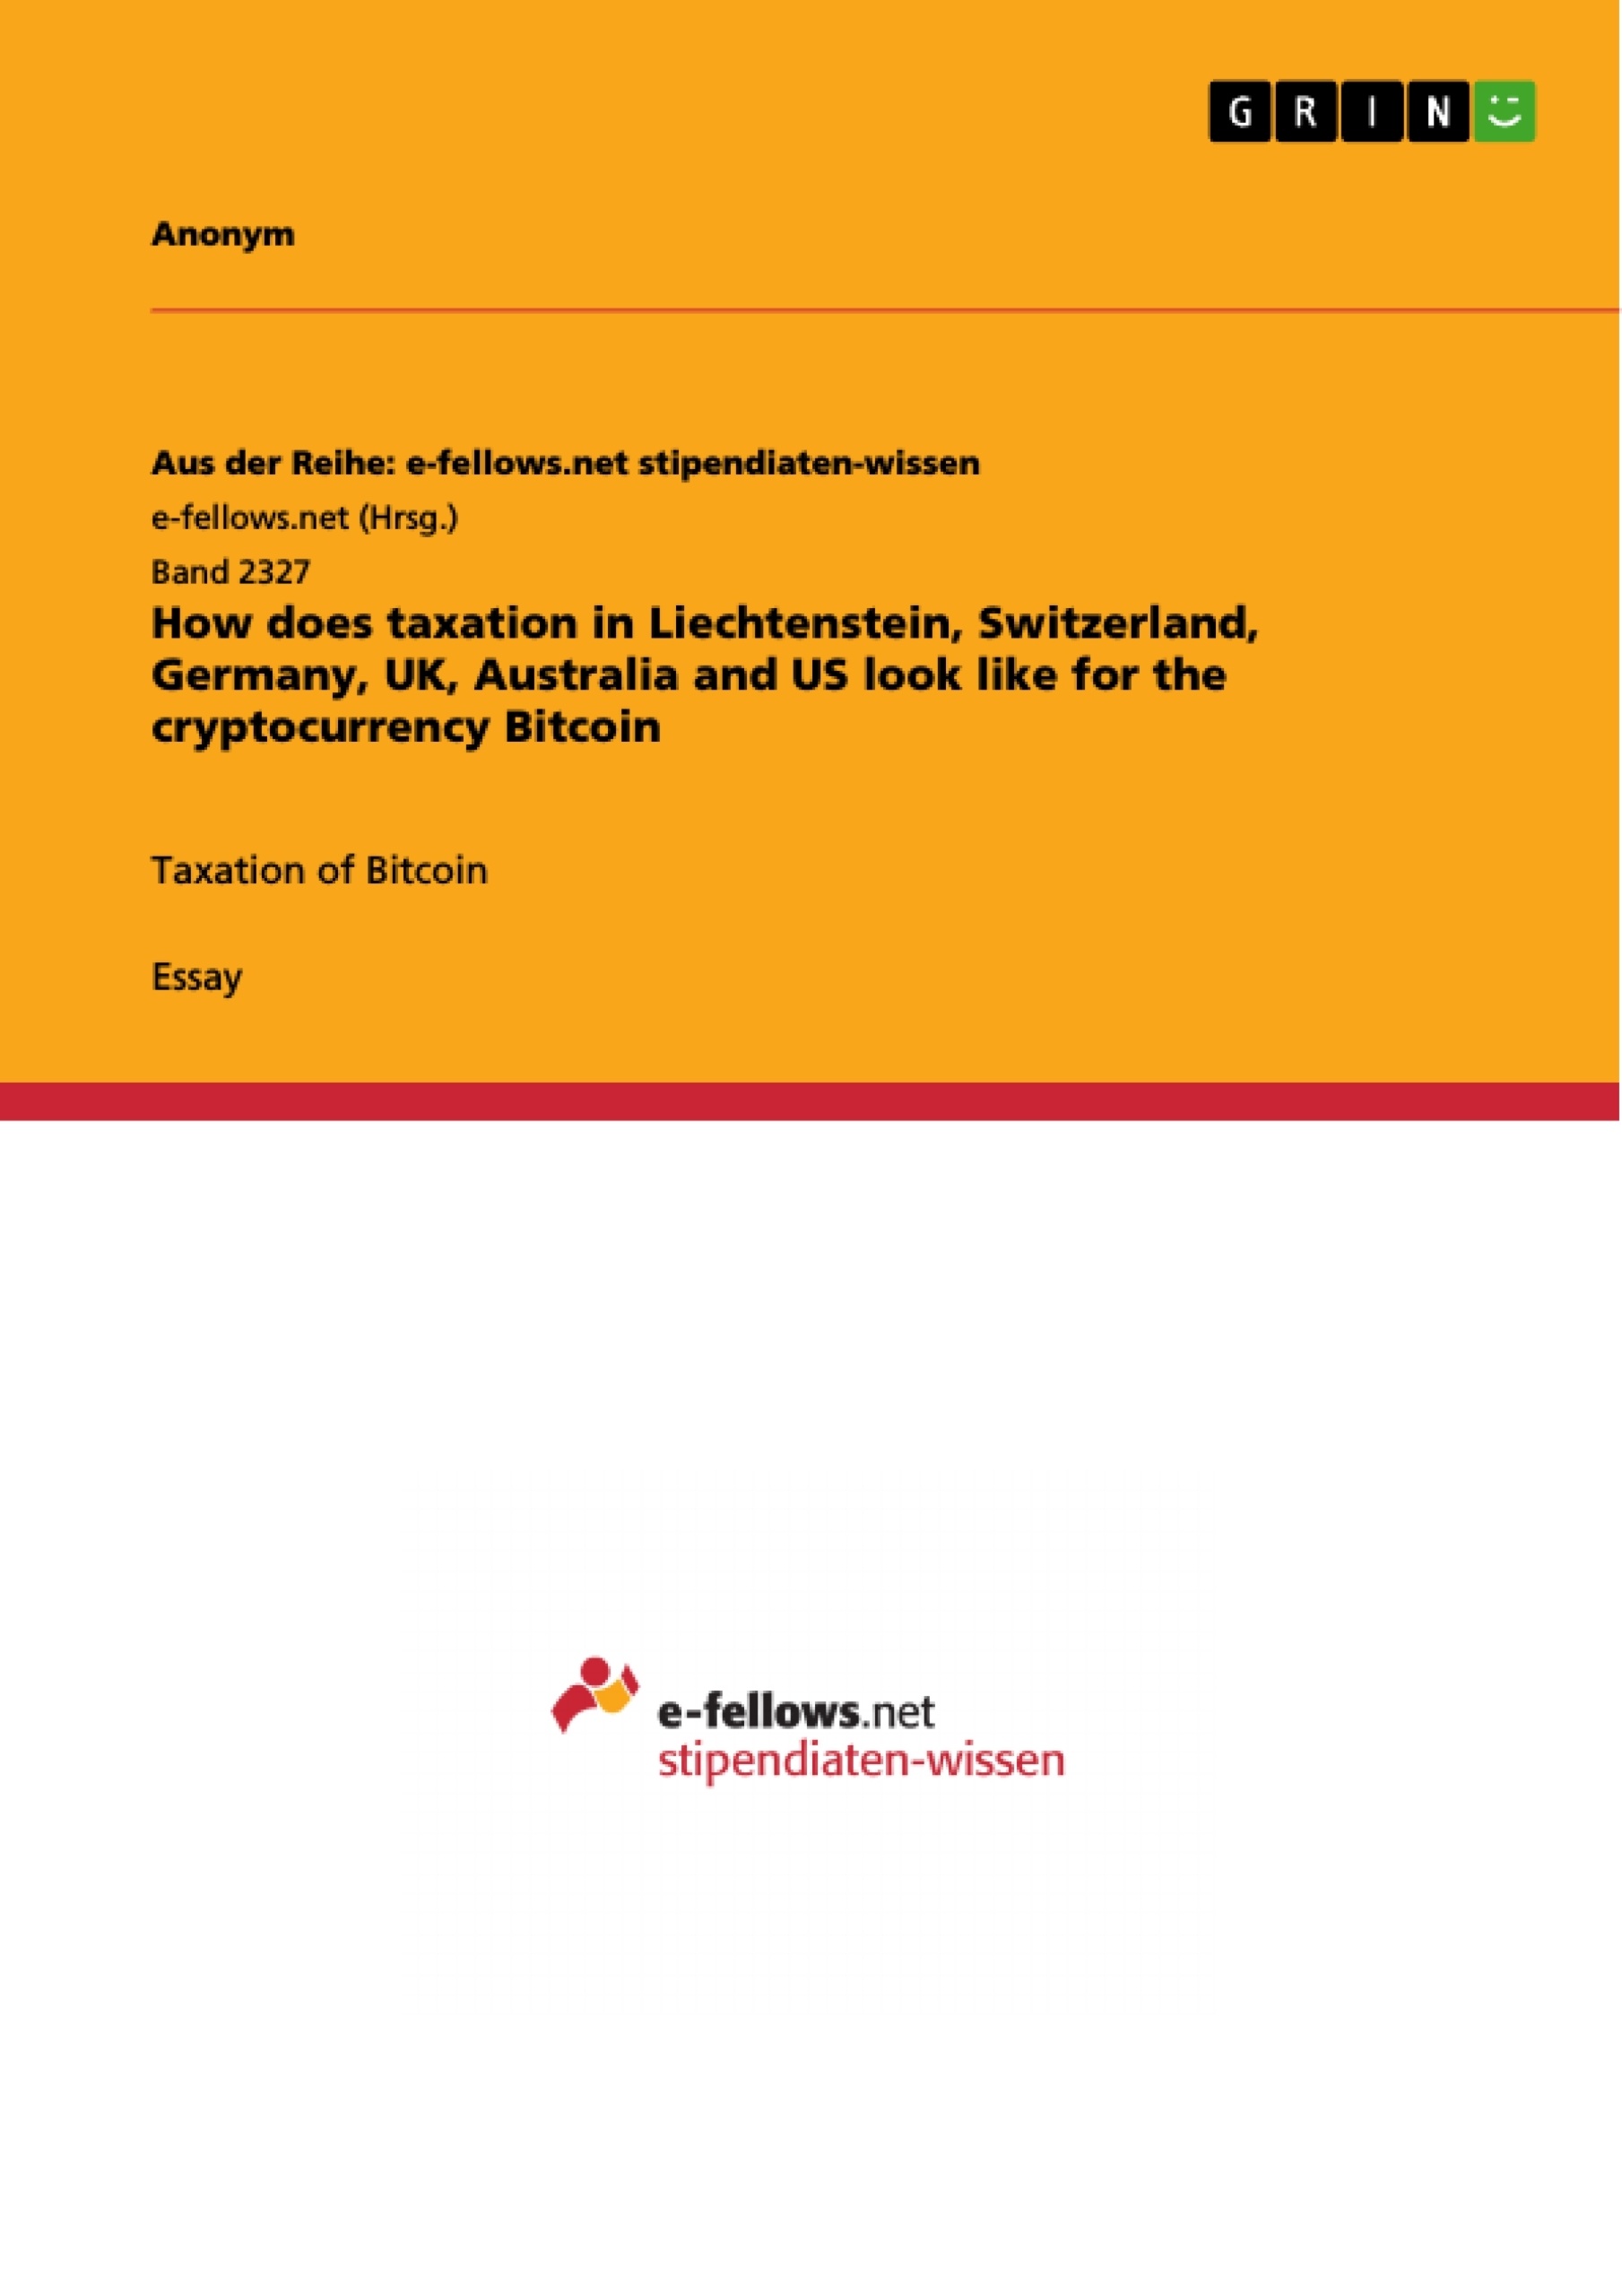 Title: How does taxation in Liechtenstein, Switzerland, Germany, UK, Australia and US look like for the cryptocurrency Bitcoin